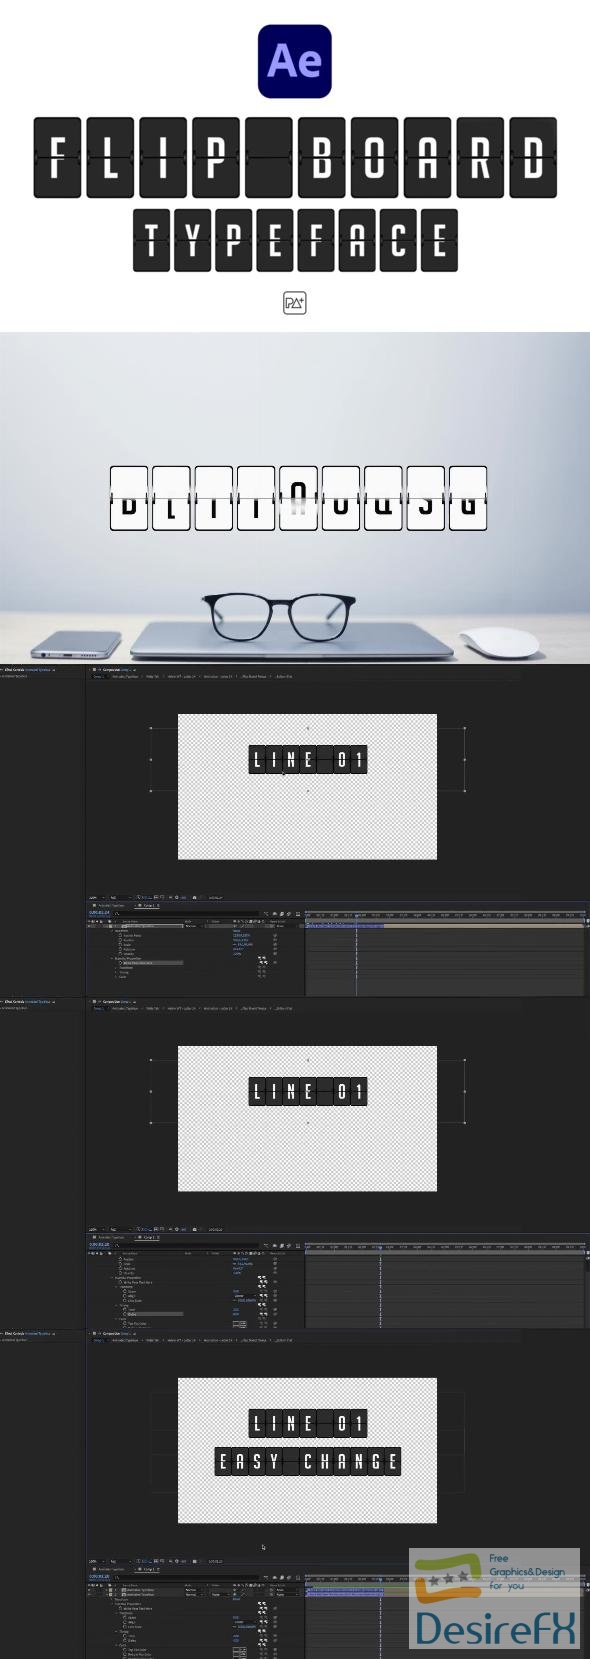 VideoHive Flip Board Typeface For After Effects 44561913